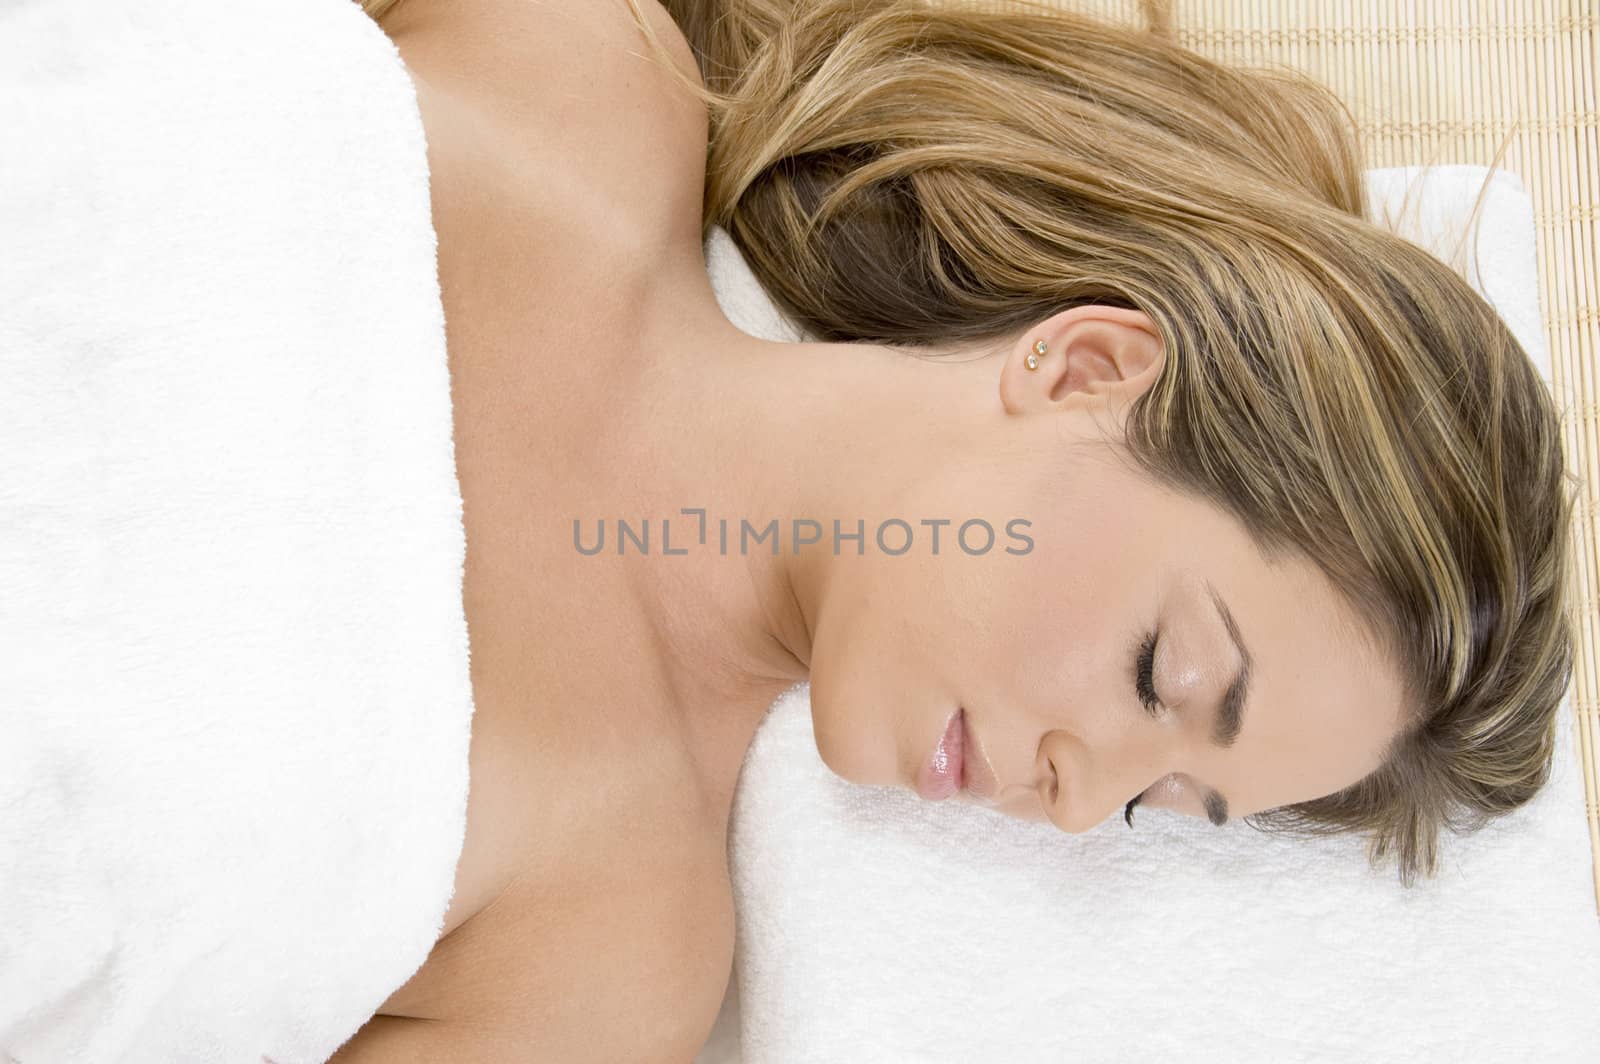 sleeping young female in towel